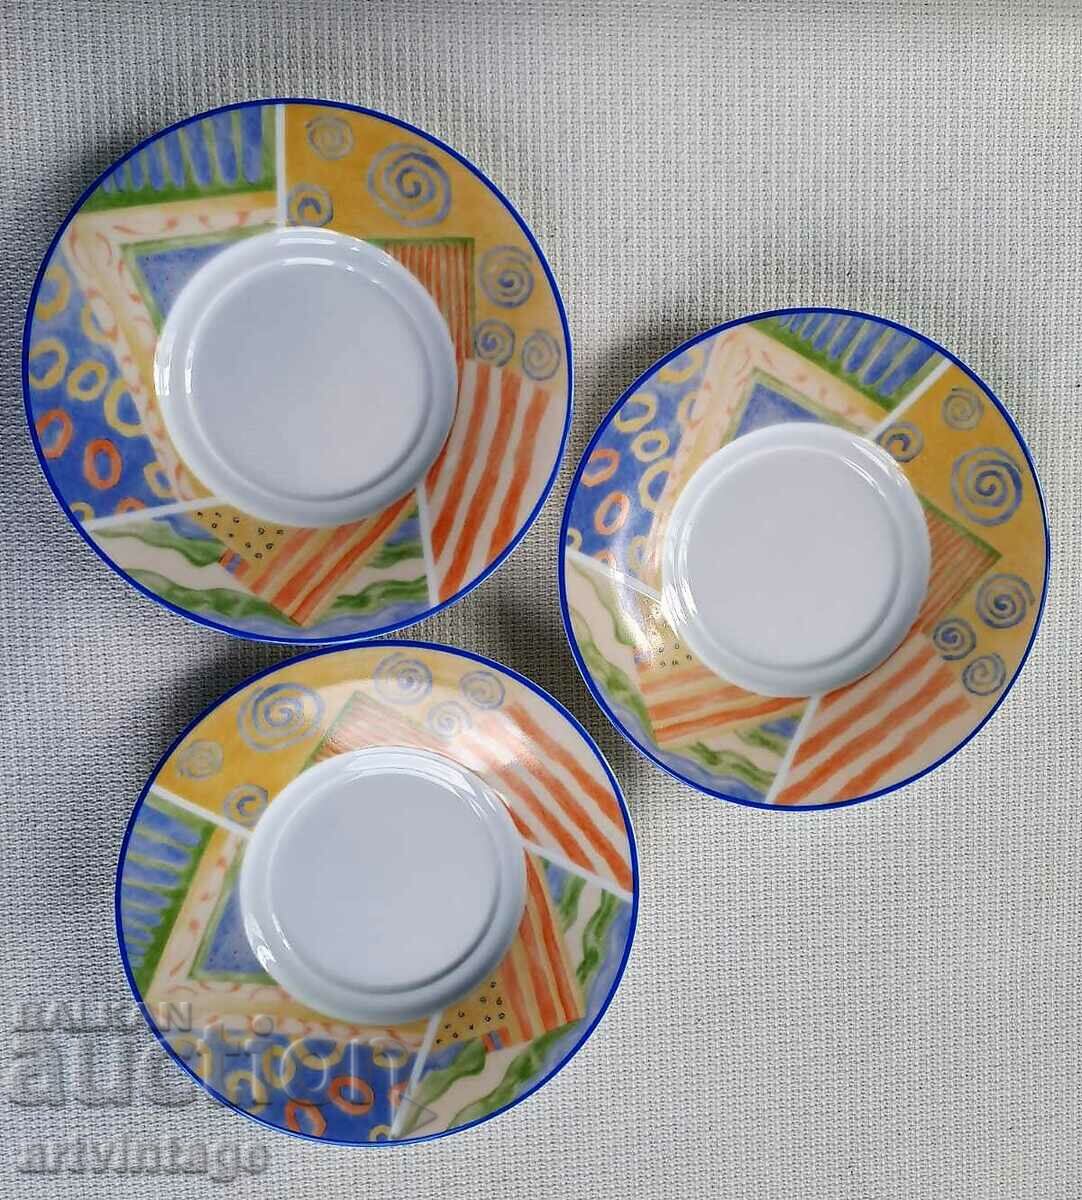 Three colored saucers